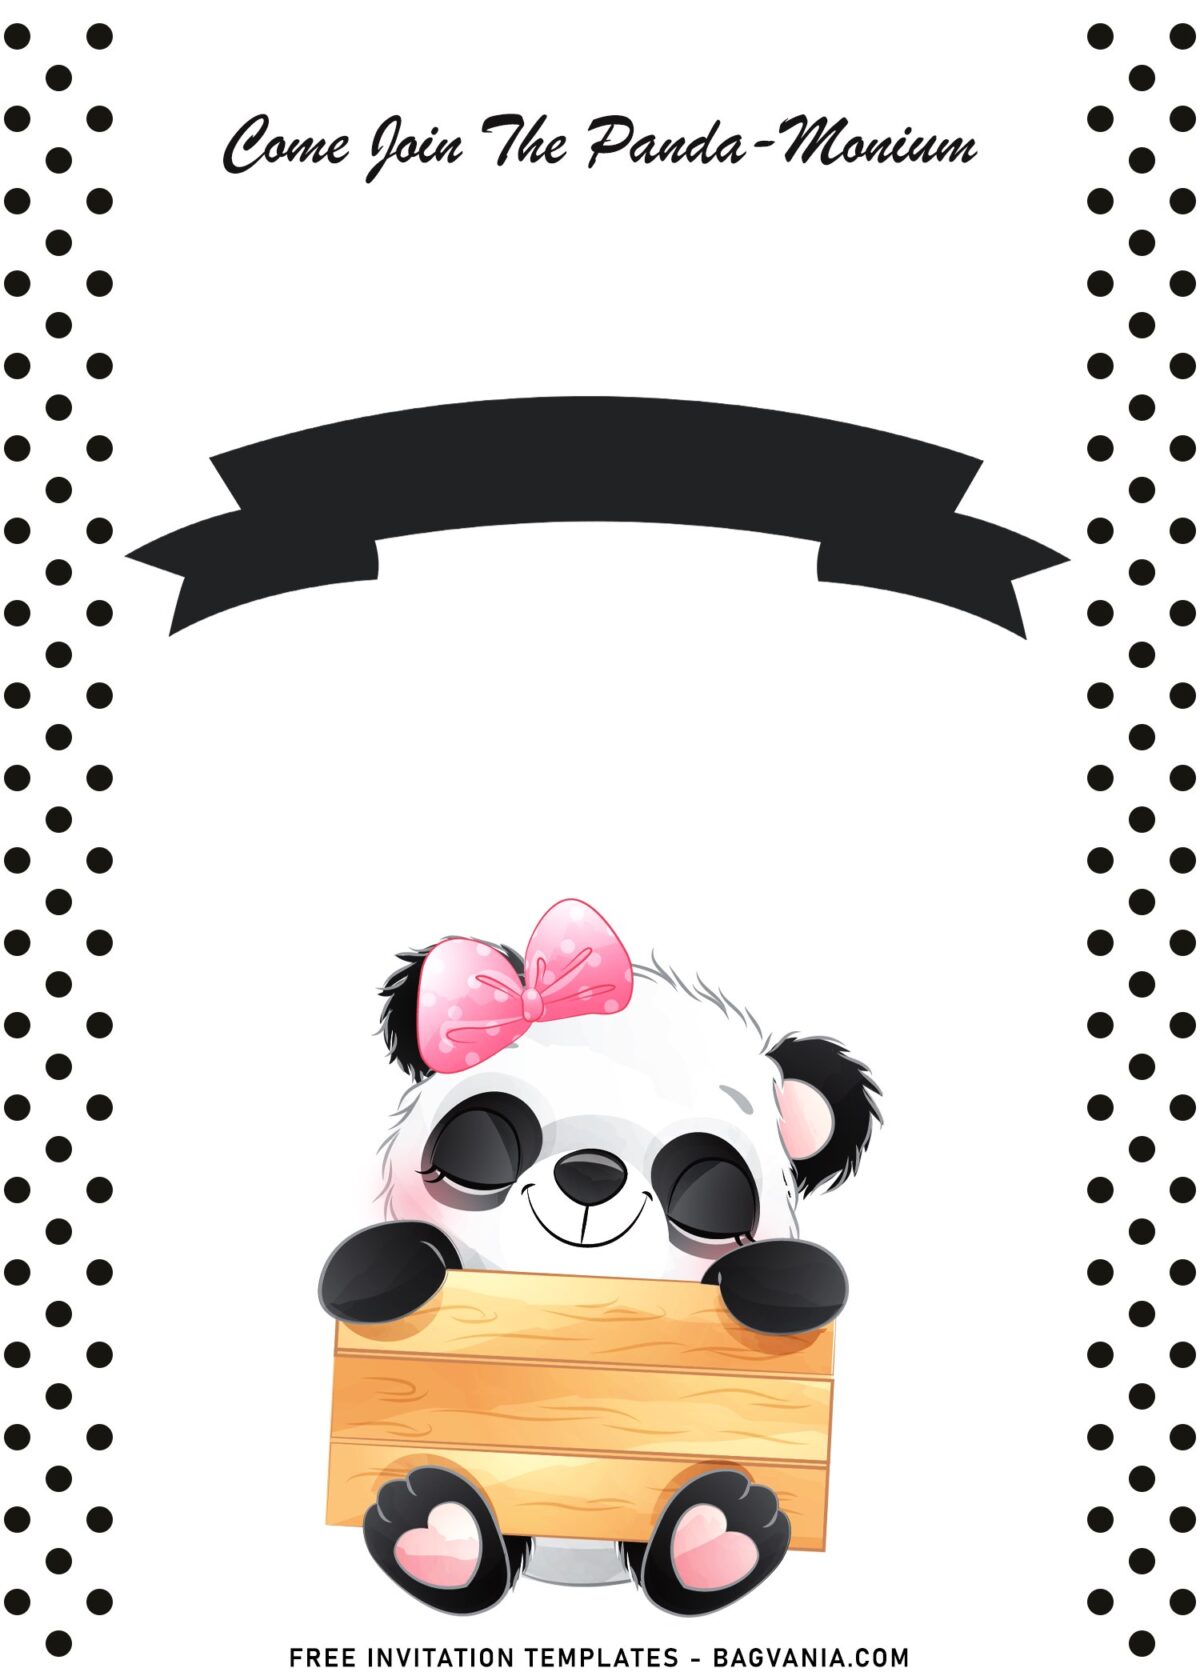 11+ Fluffy Panda Birthday Invitation Templates For Your Kid's Birthday with cute panda in basket